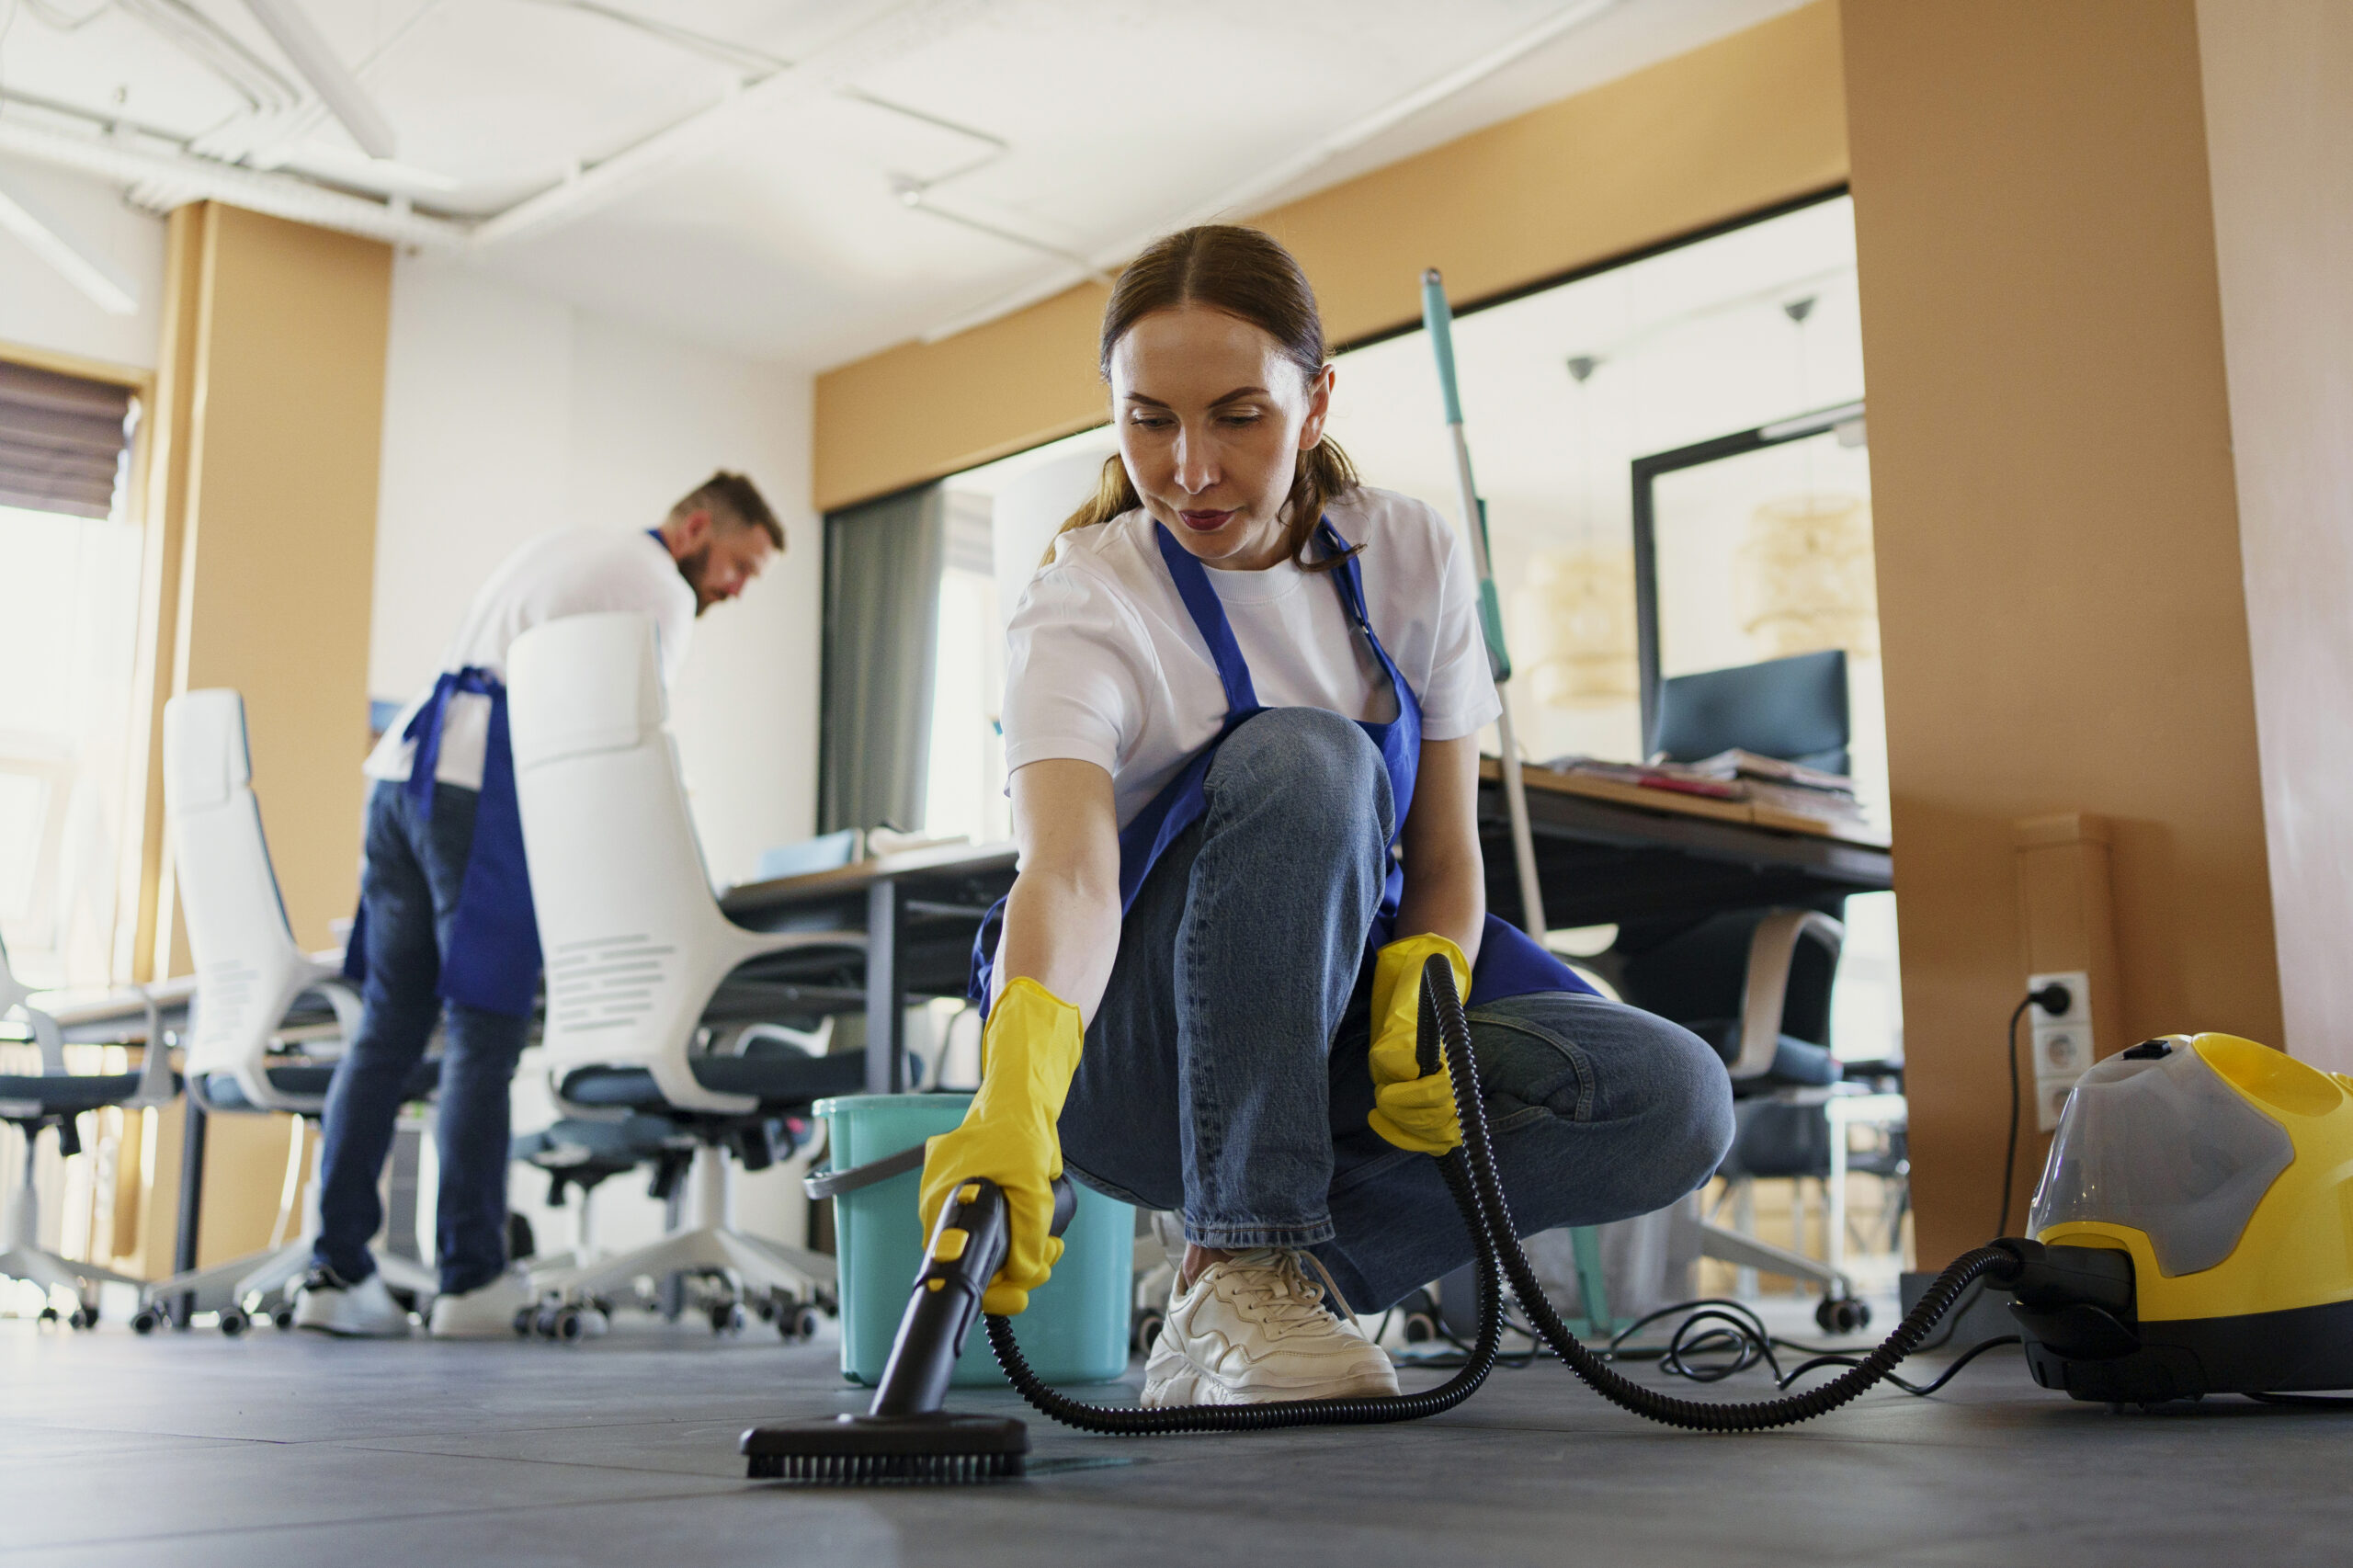  Commercial cleaning in Kingsteignton  